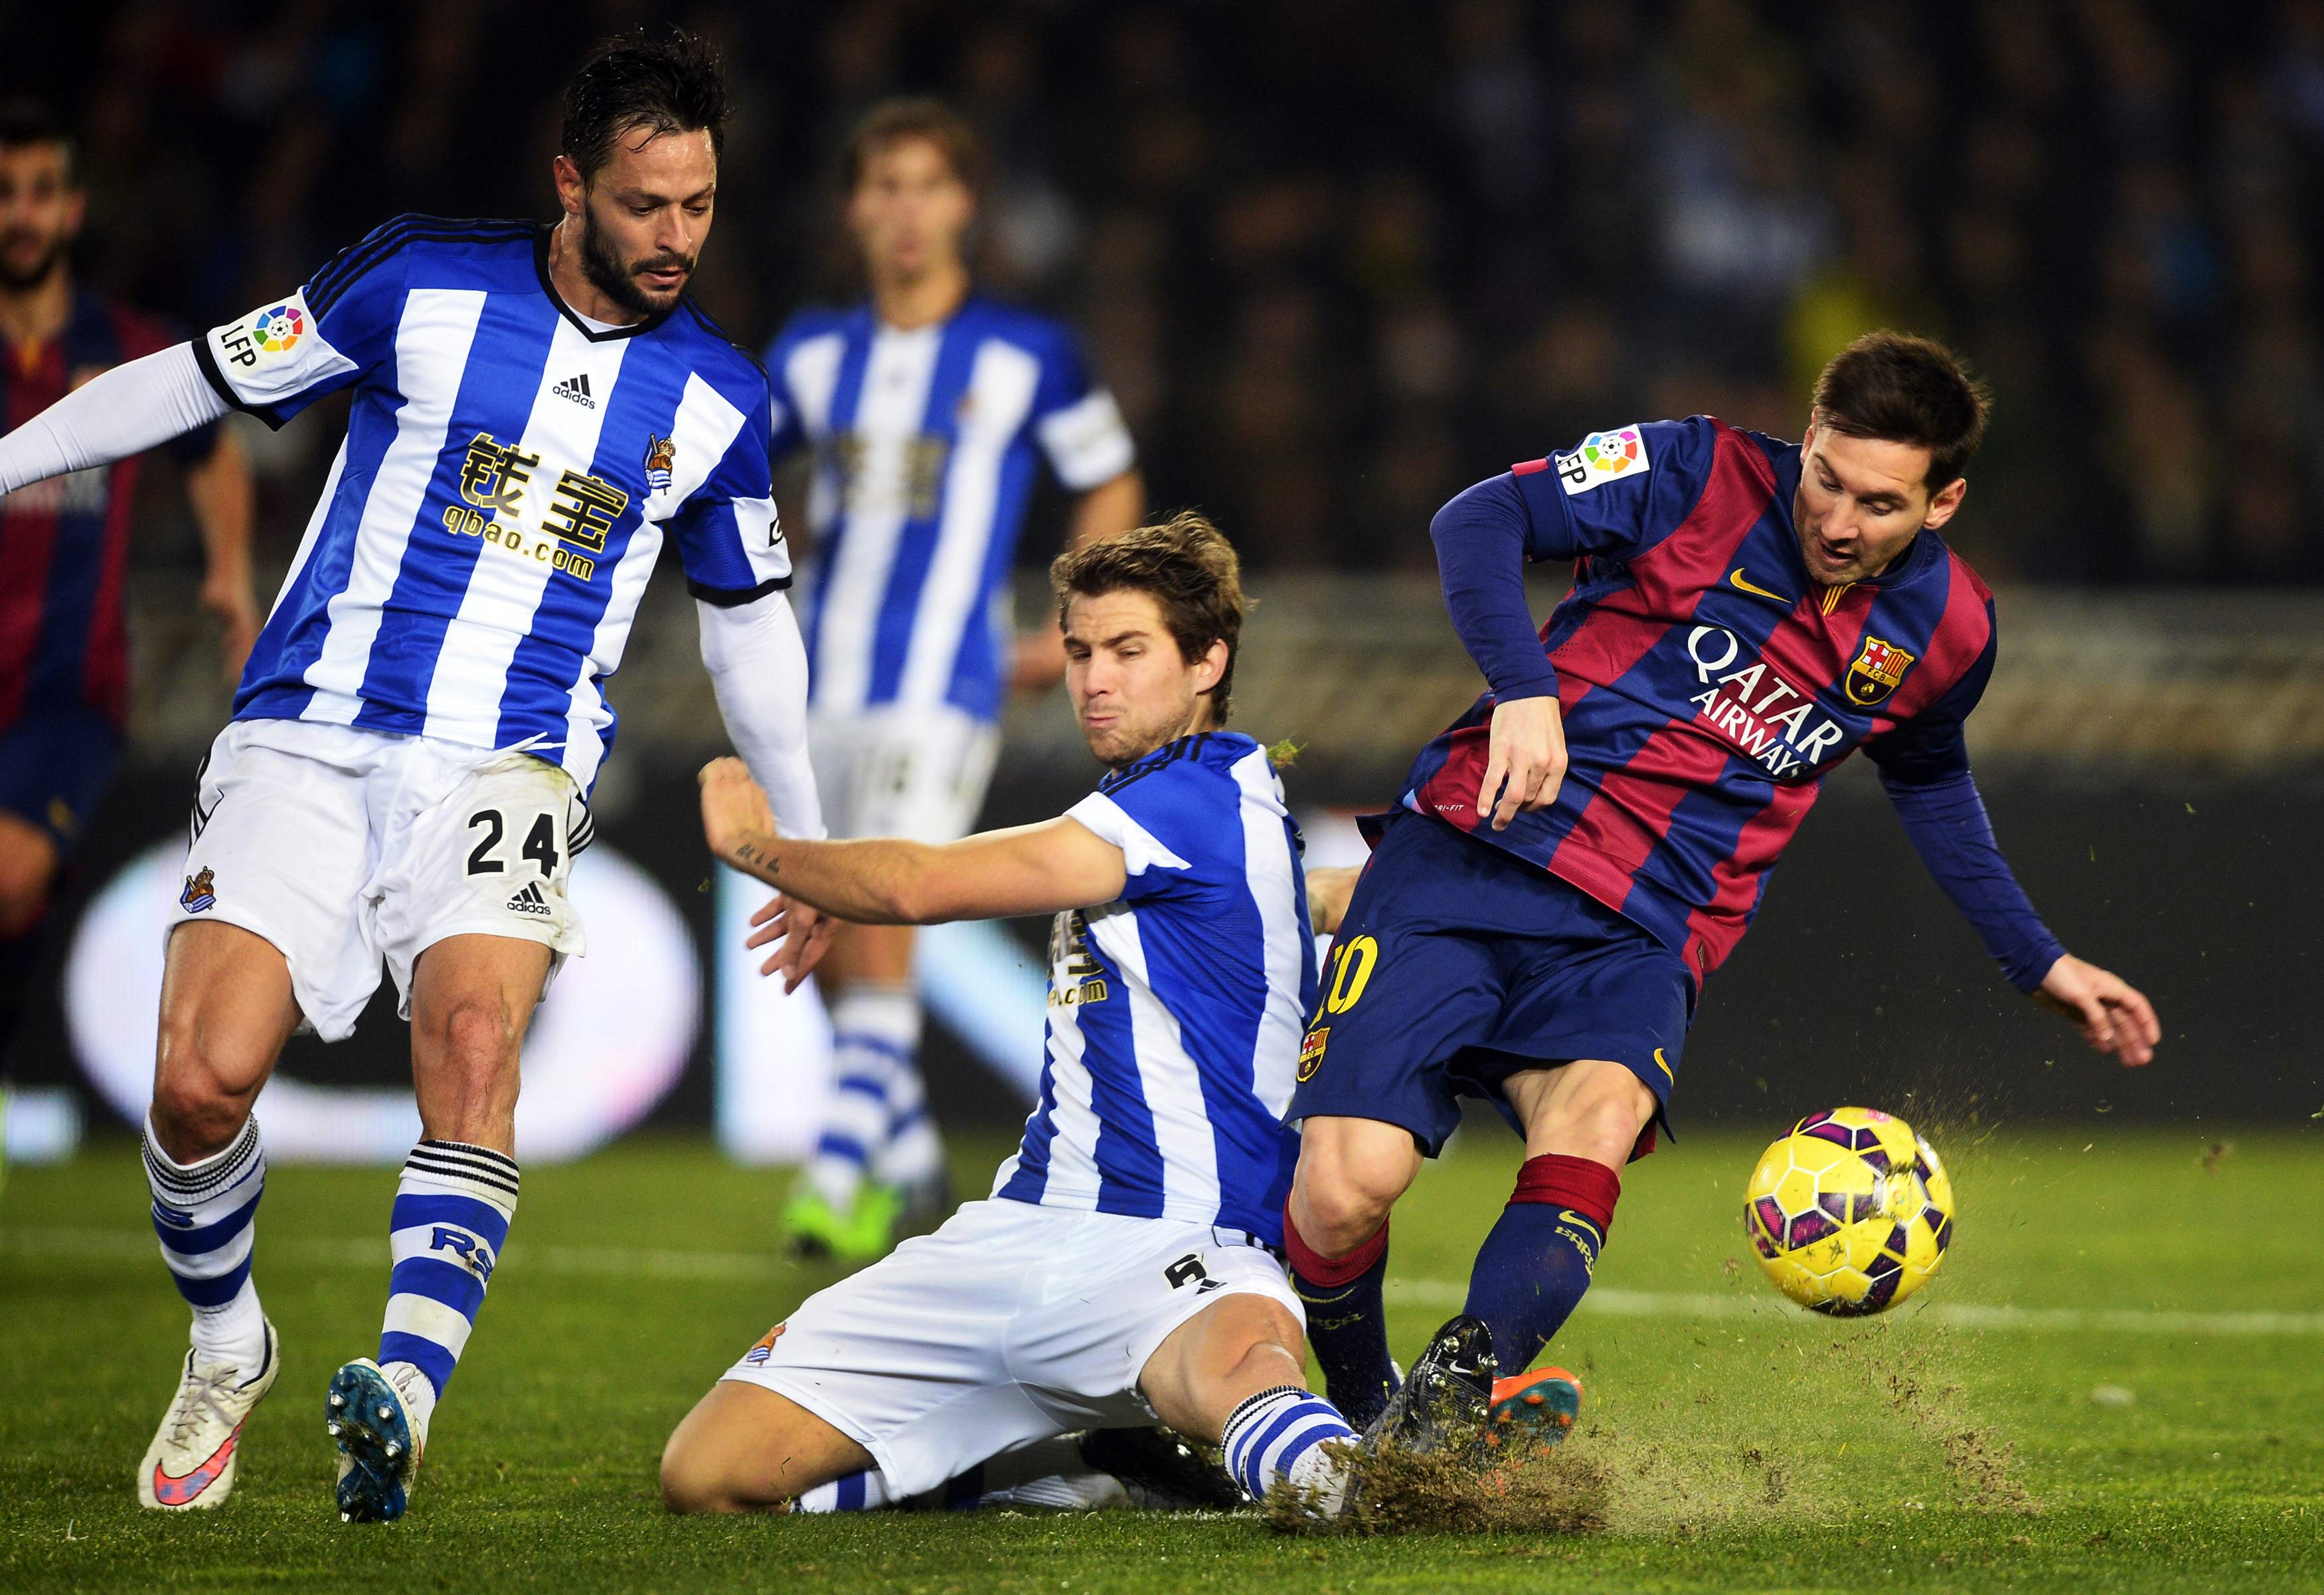 Barcelona's Lionel Messi (R) fights for the ball with Real Sociedad's Inigo Martinez (C) and Alberto de la Bella during their Spanish first division soccer match at Anoeta stadium in San Sebastian January 4, 2015. REUTERS/Vincent West (SPAIN - Tags: SPORT SOCCER)